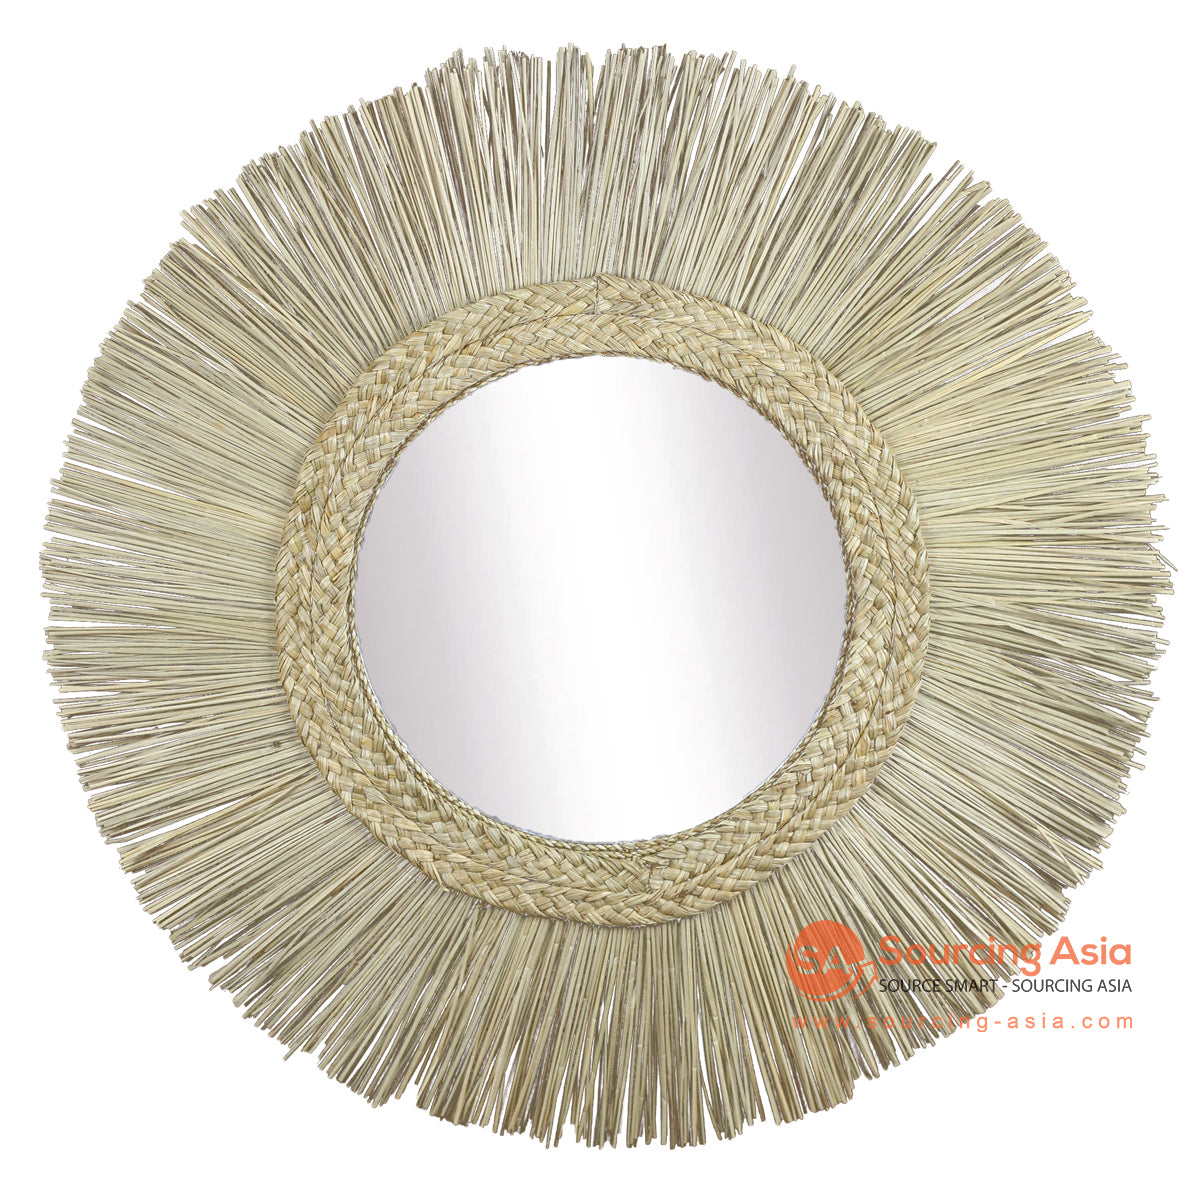 SHL395 NATURAL SEAGRASS ROUND MIRROR (WITH 30CM MIRROR)